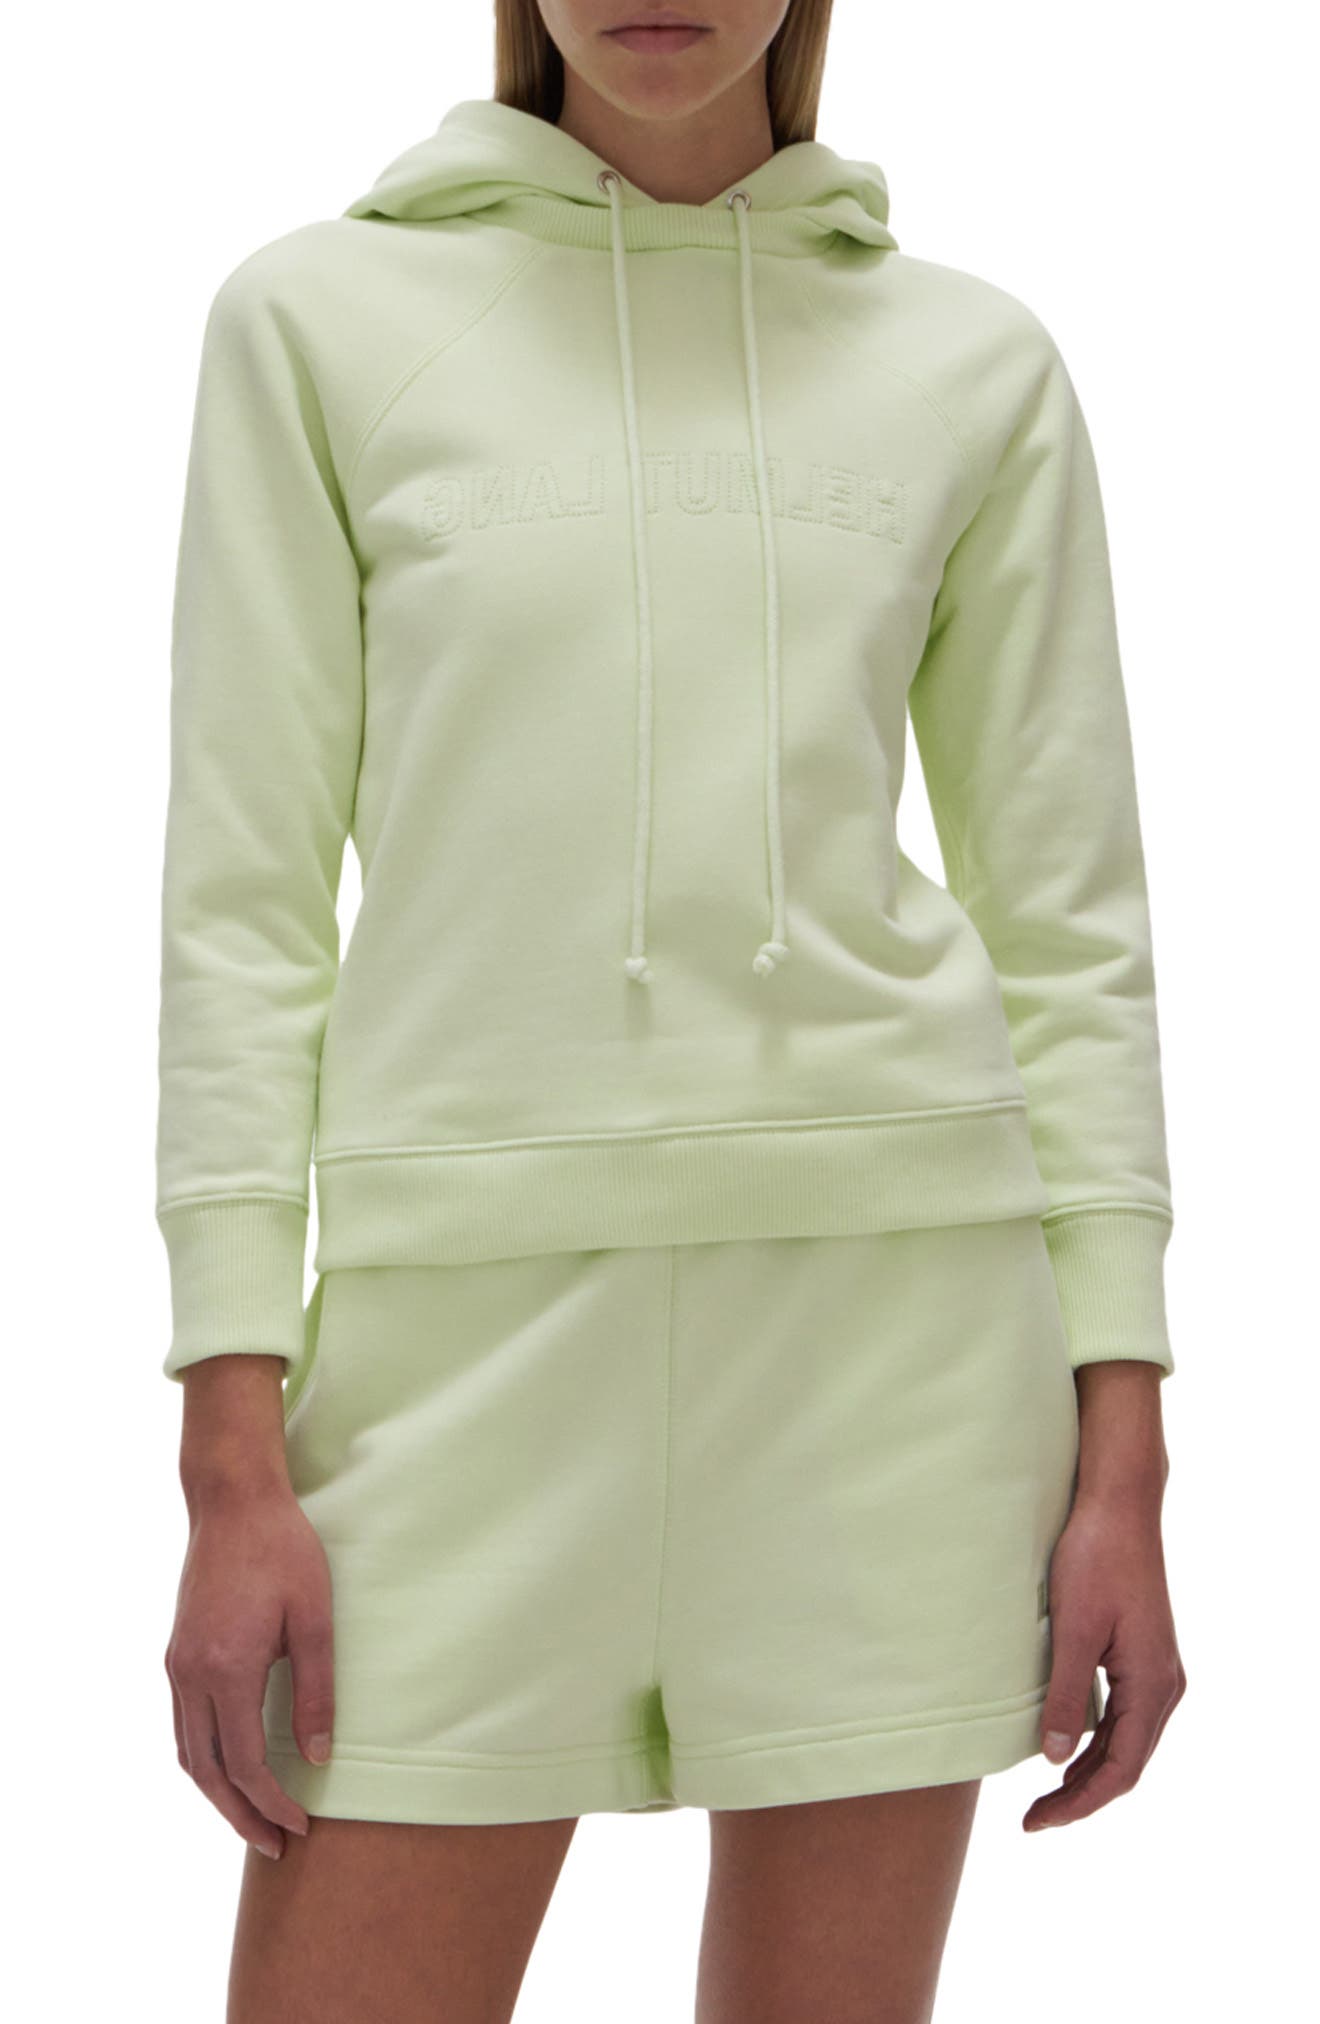 Helmut Lang Embroidered Fitted Hoodie in Electric Green at Nordstrom, Size Xx-Small